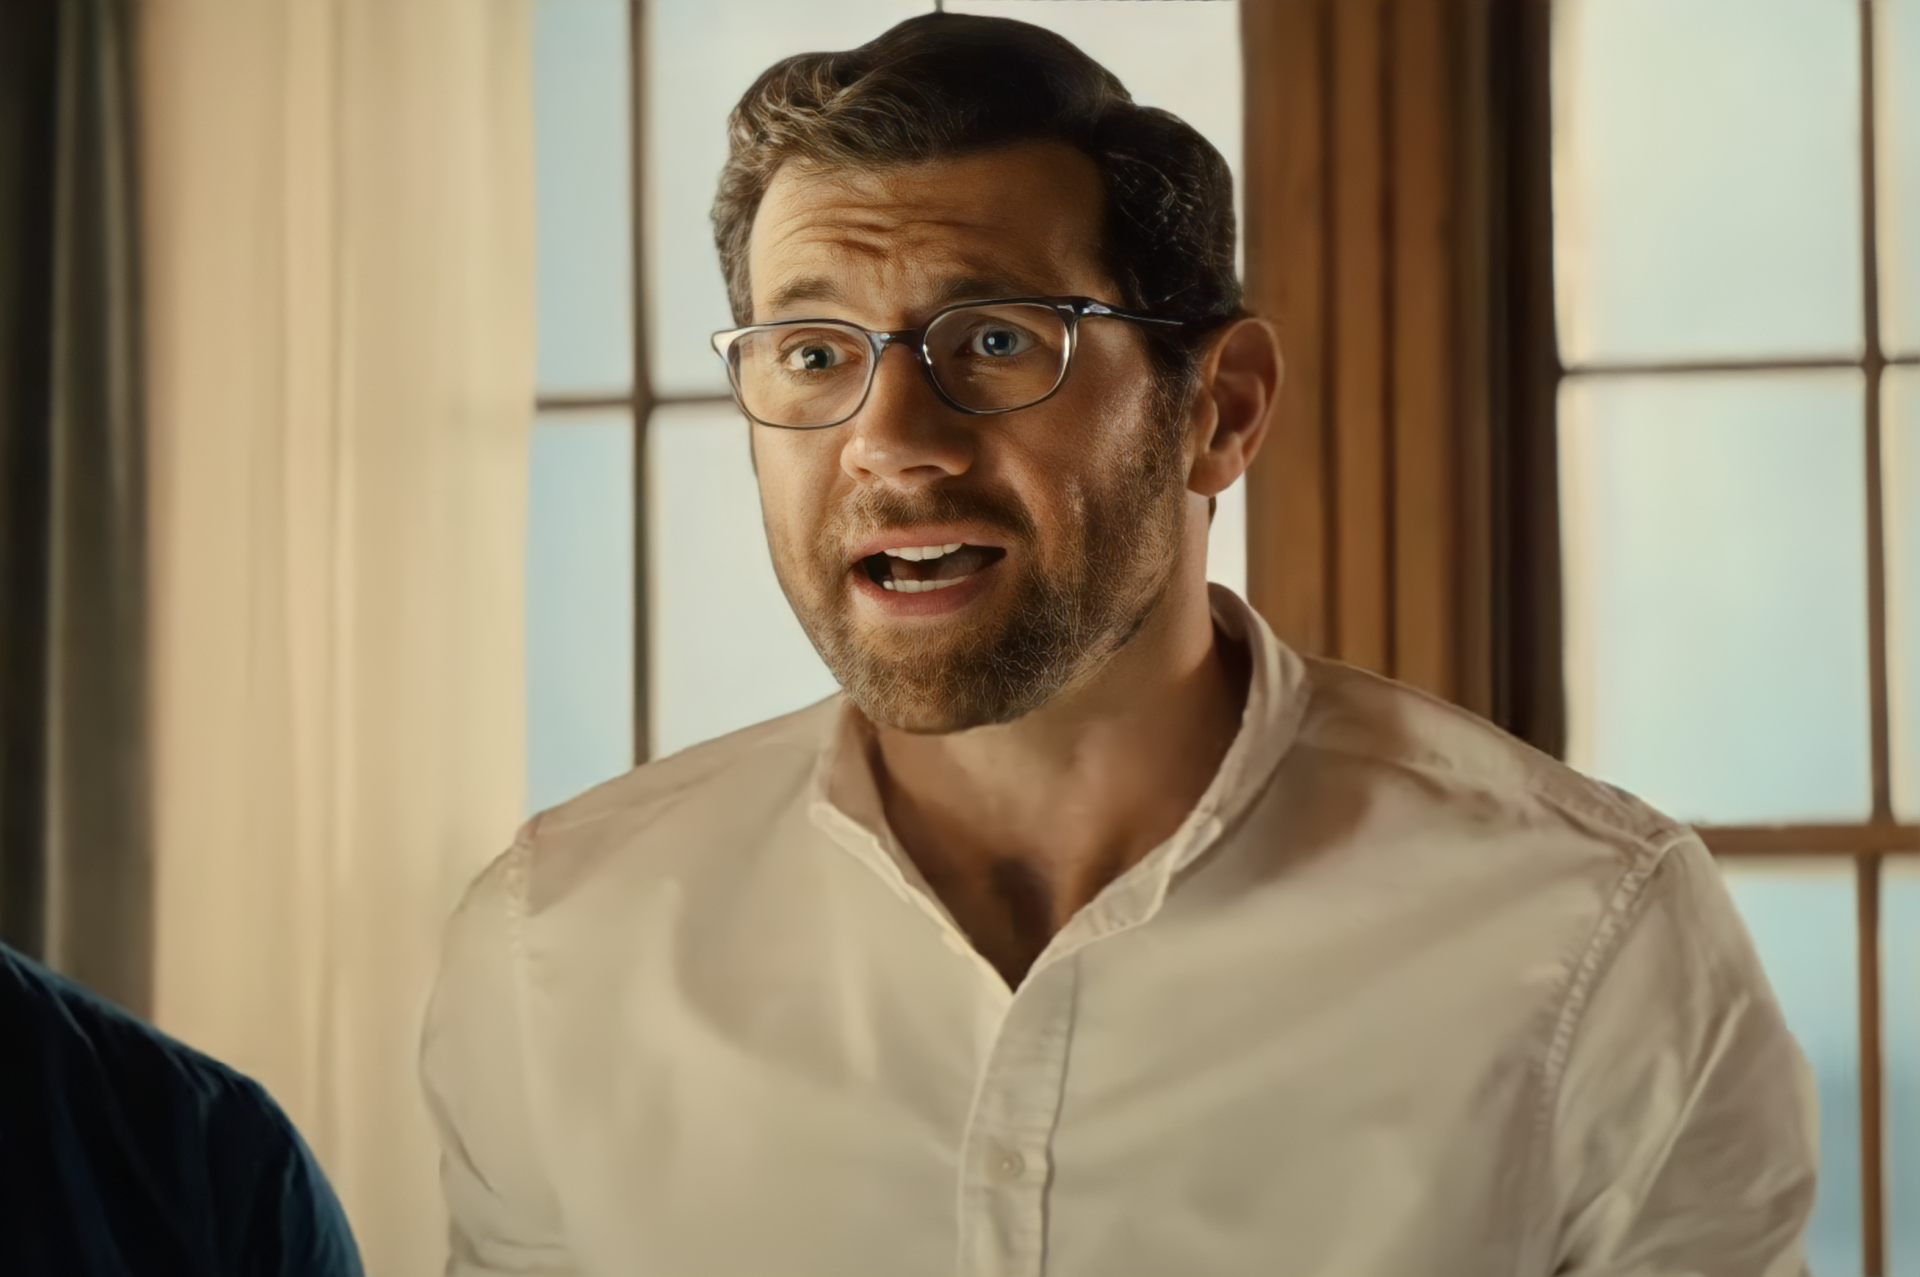 Bros: Billy Eichner on 'disappointing' opening weekend - Attitude